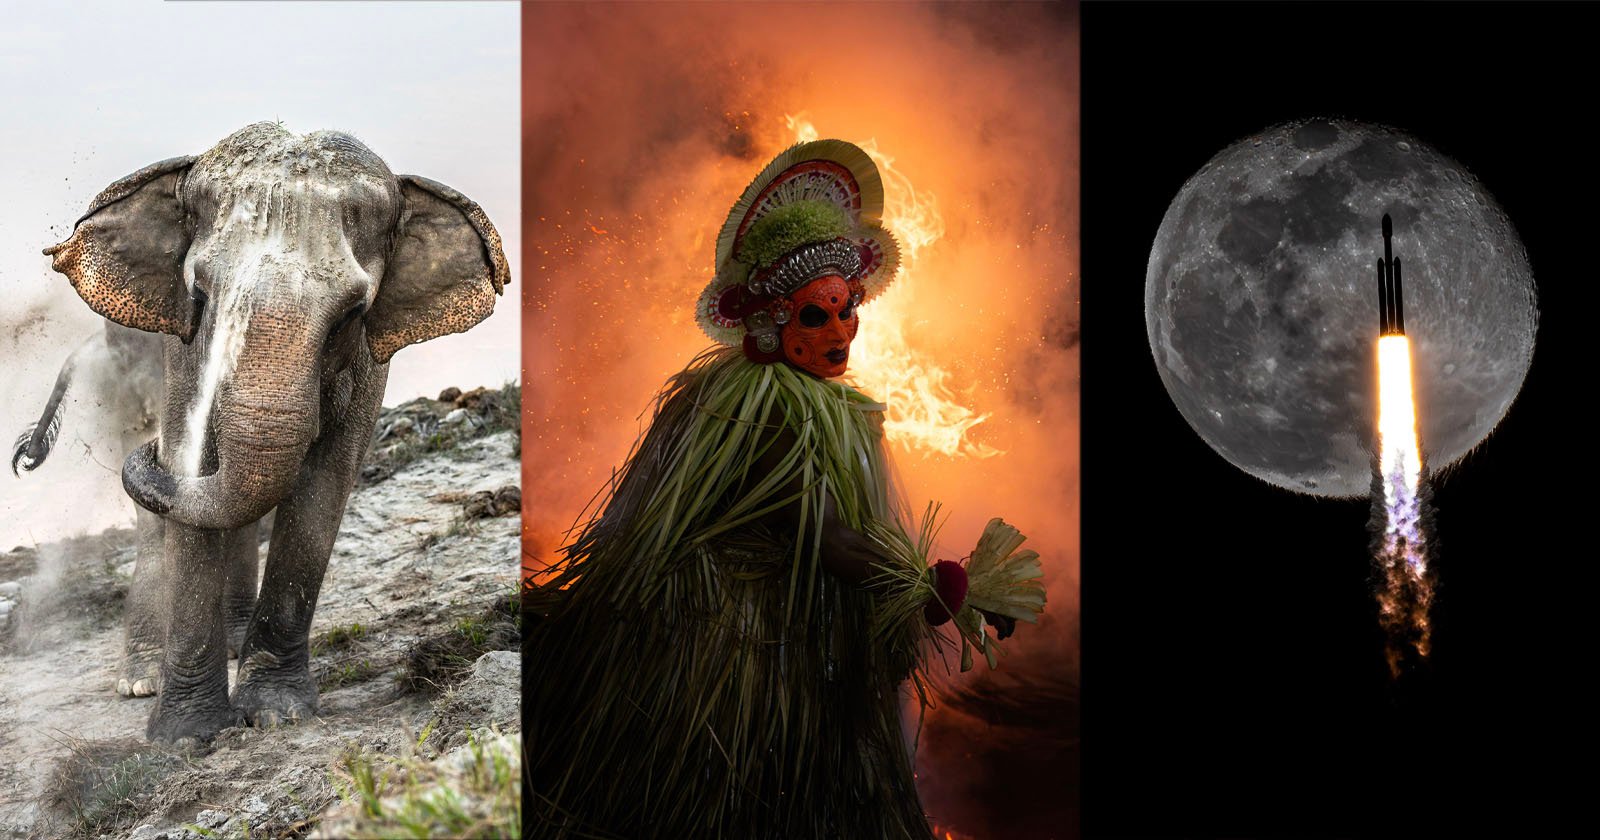 The Best Photographs From 31 Countries, According to the World Photography Awards